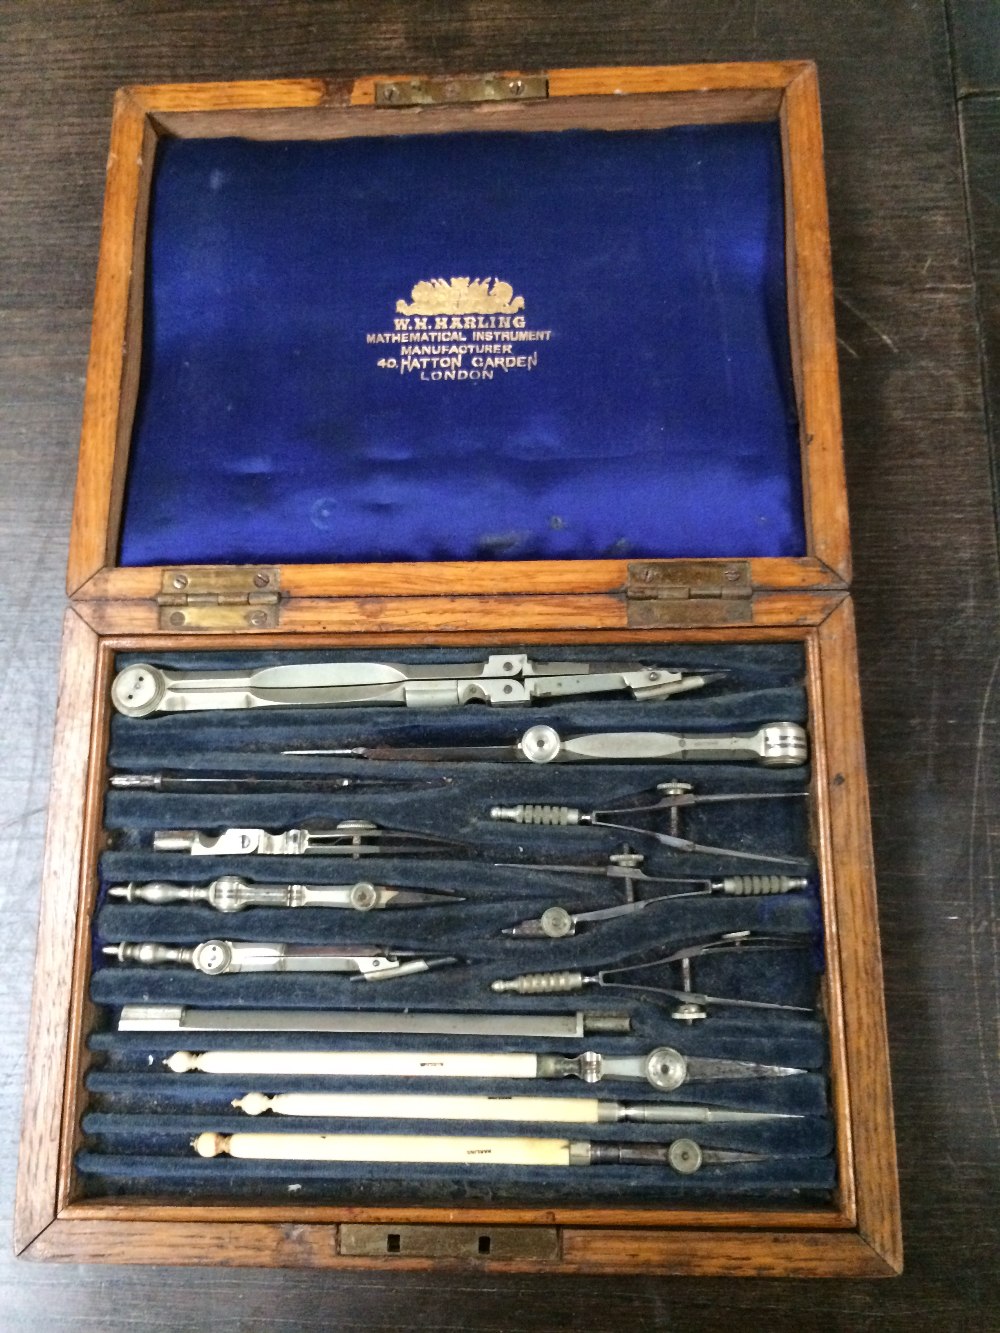 Fitted Draftsman's set of scientific and mathematical instruments, made by W. H. Harling